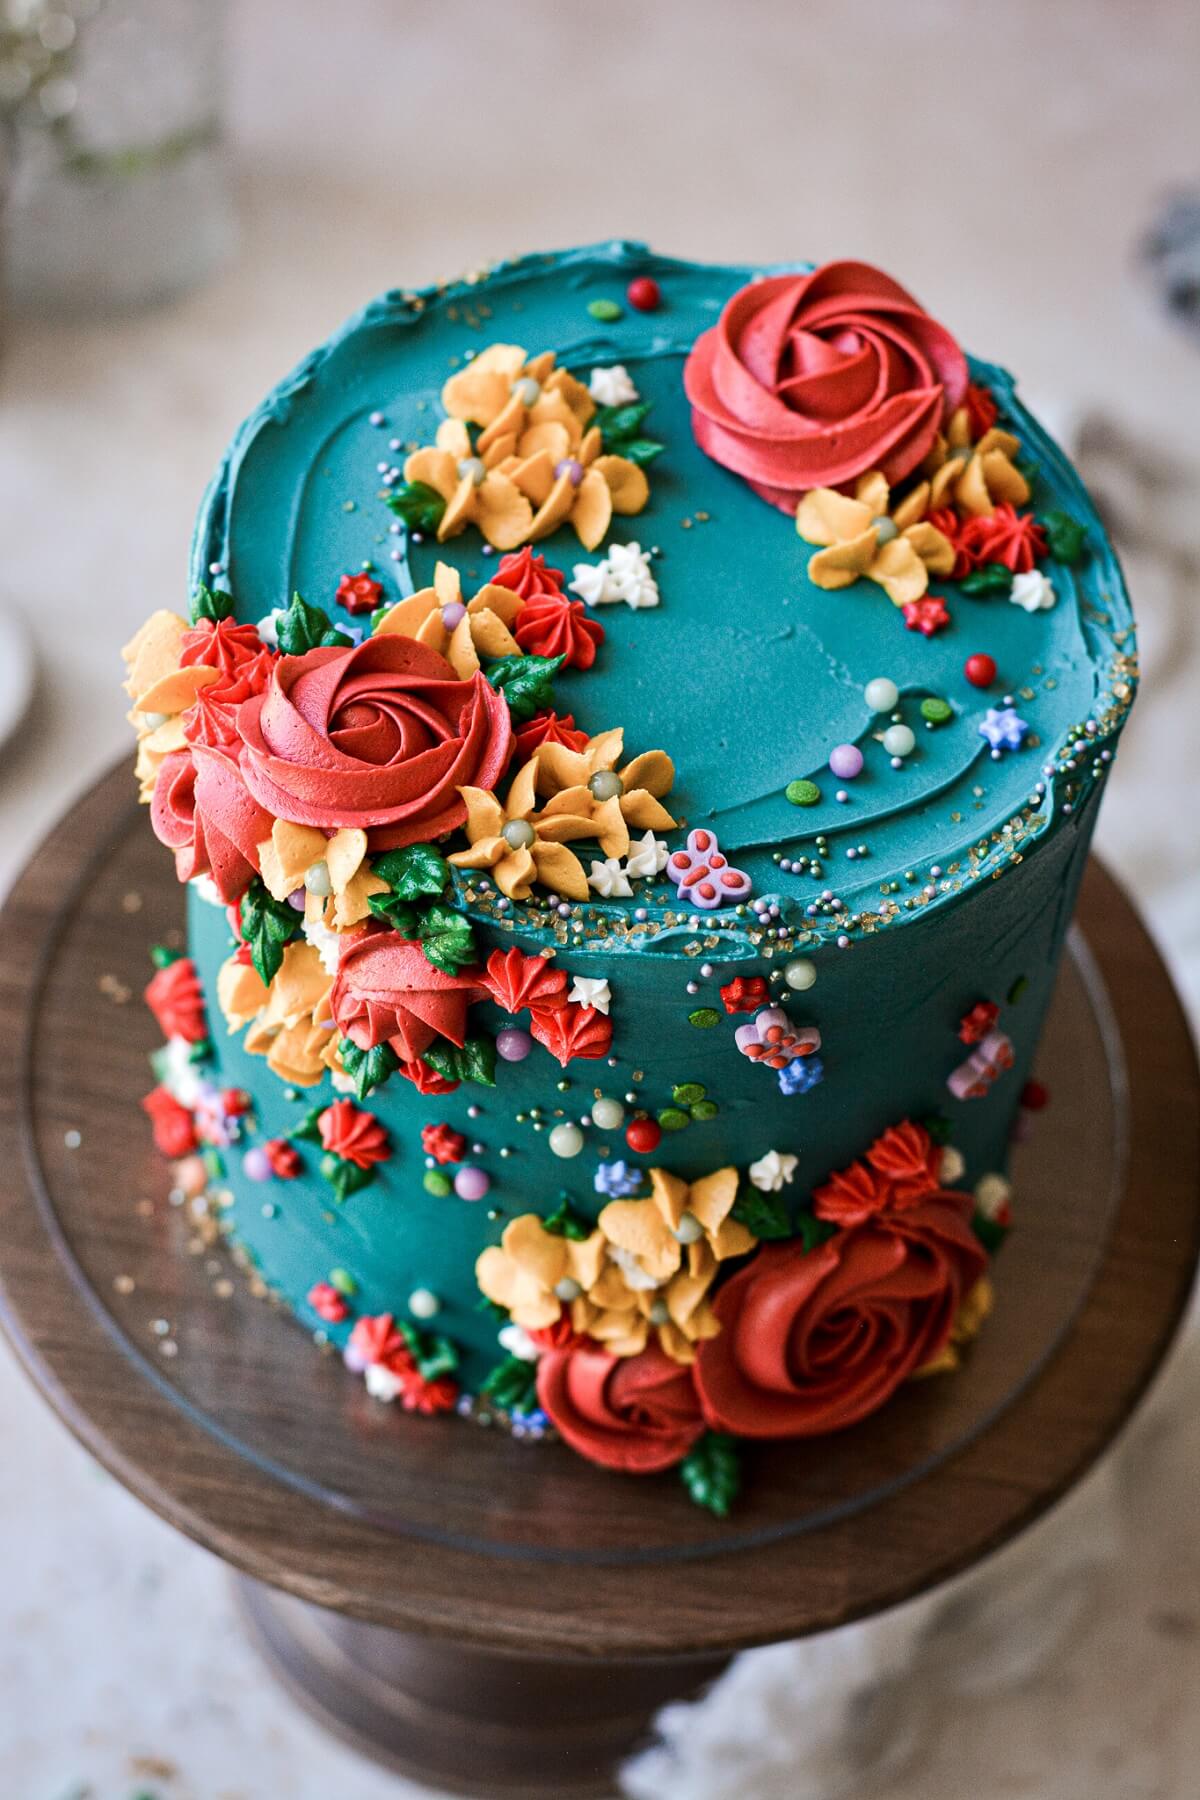 Aggregate more than 76 floral cake buttercream best - awesomeenglish.edu.vn